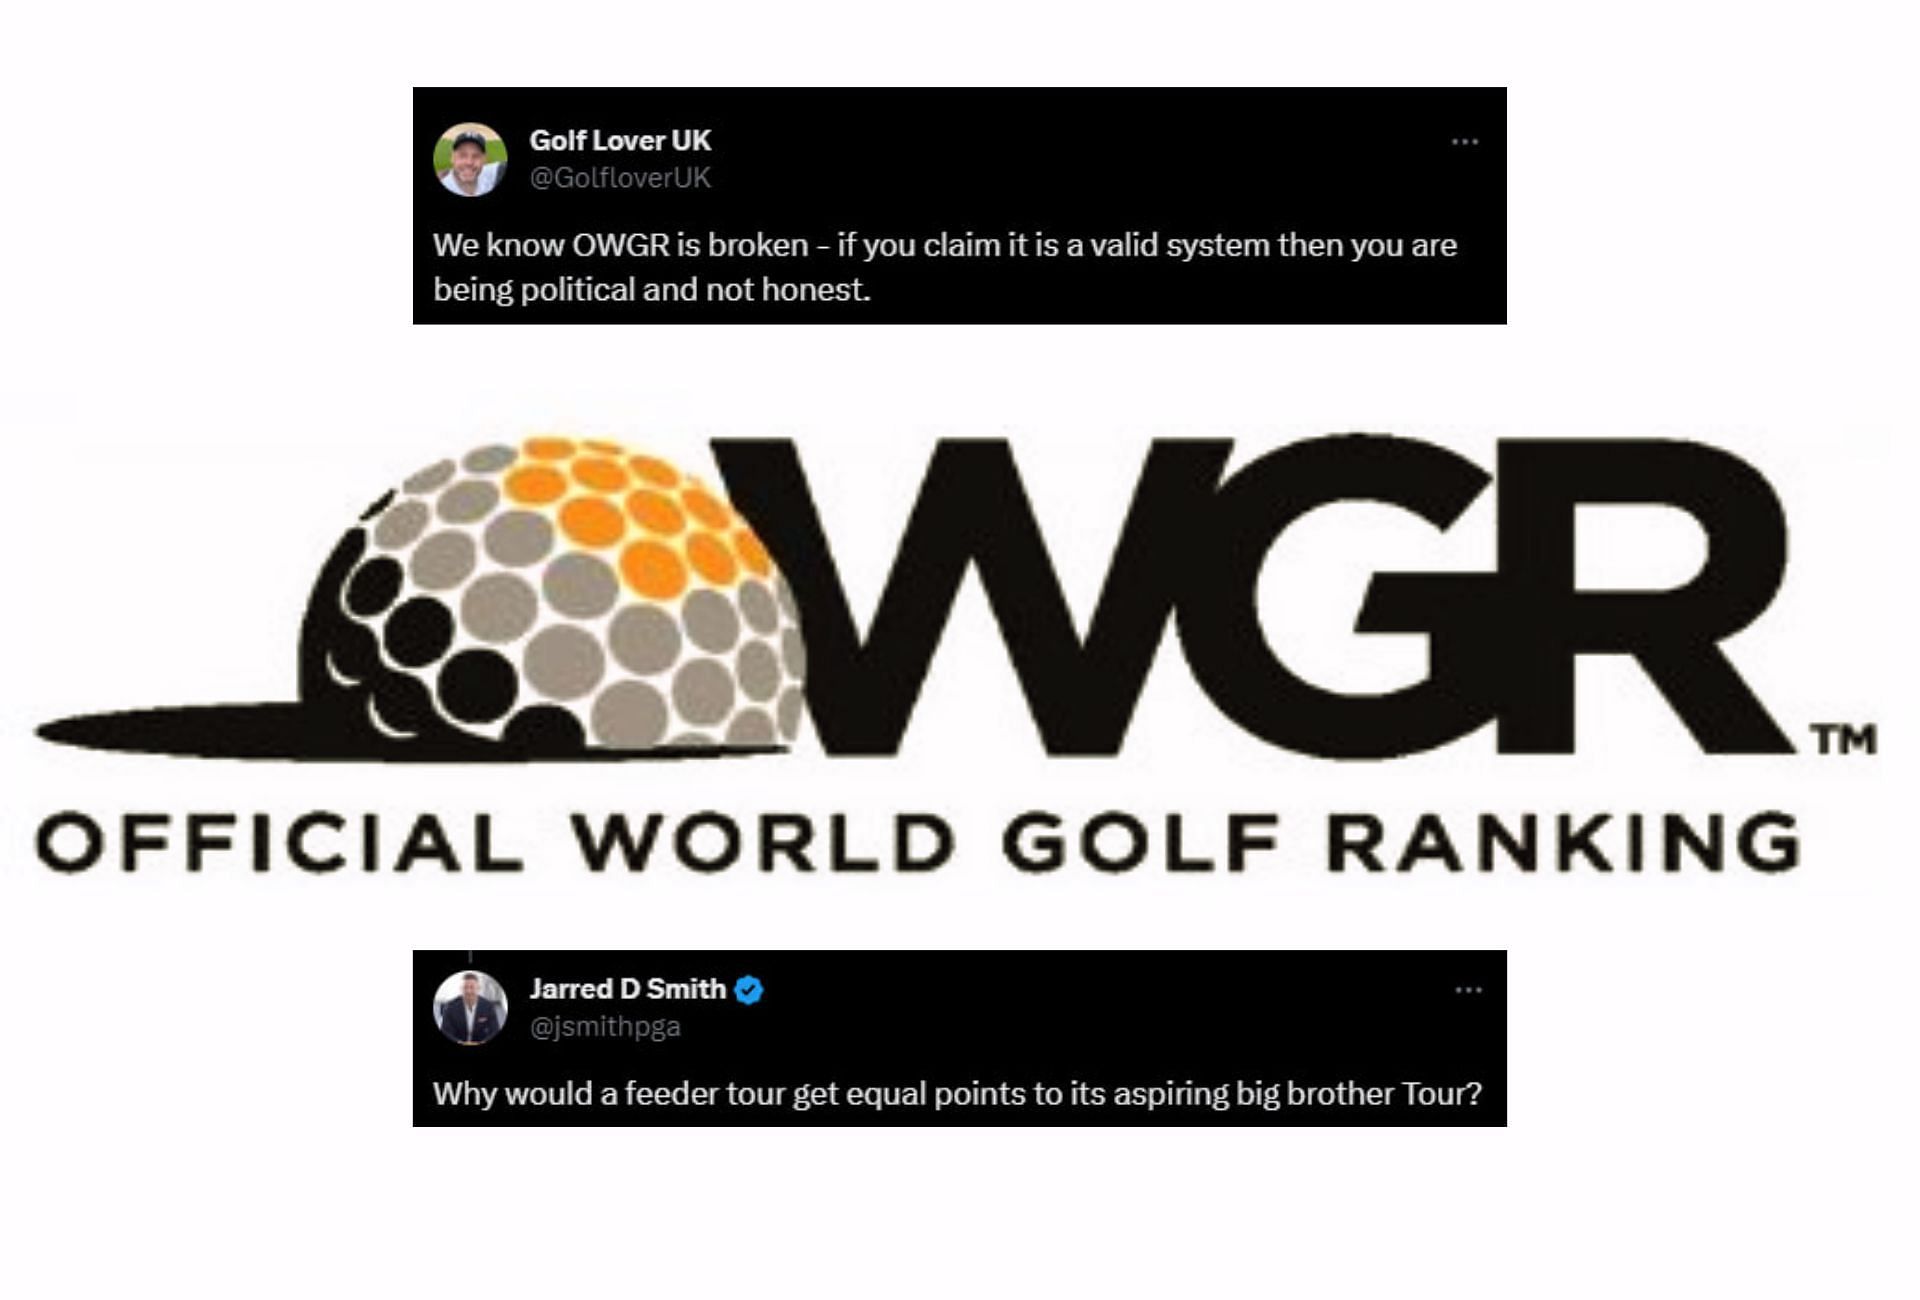 OWGR is once again exposed to public scrutiny (Image via X @OWGRltd).